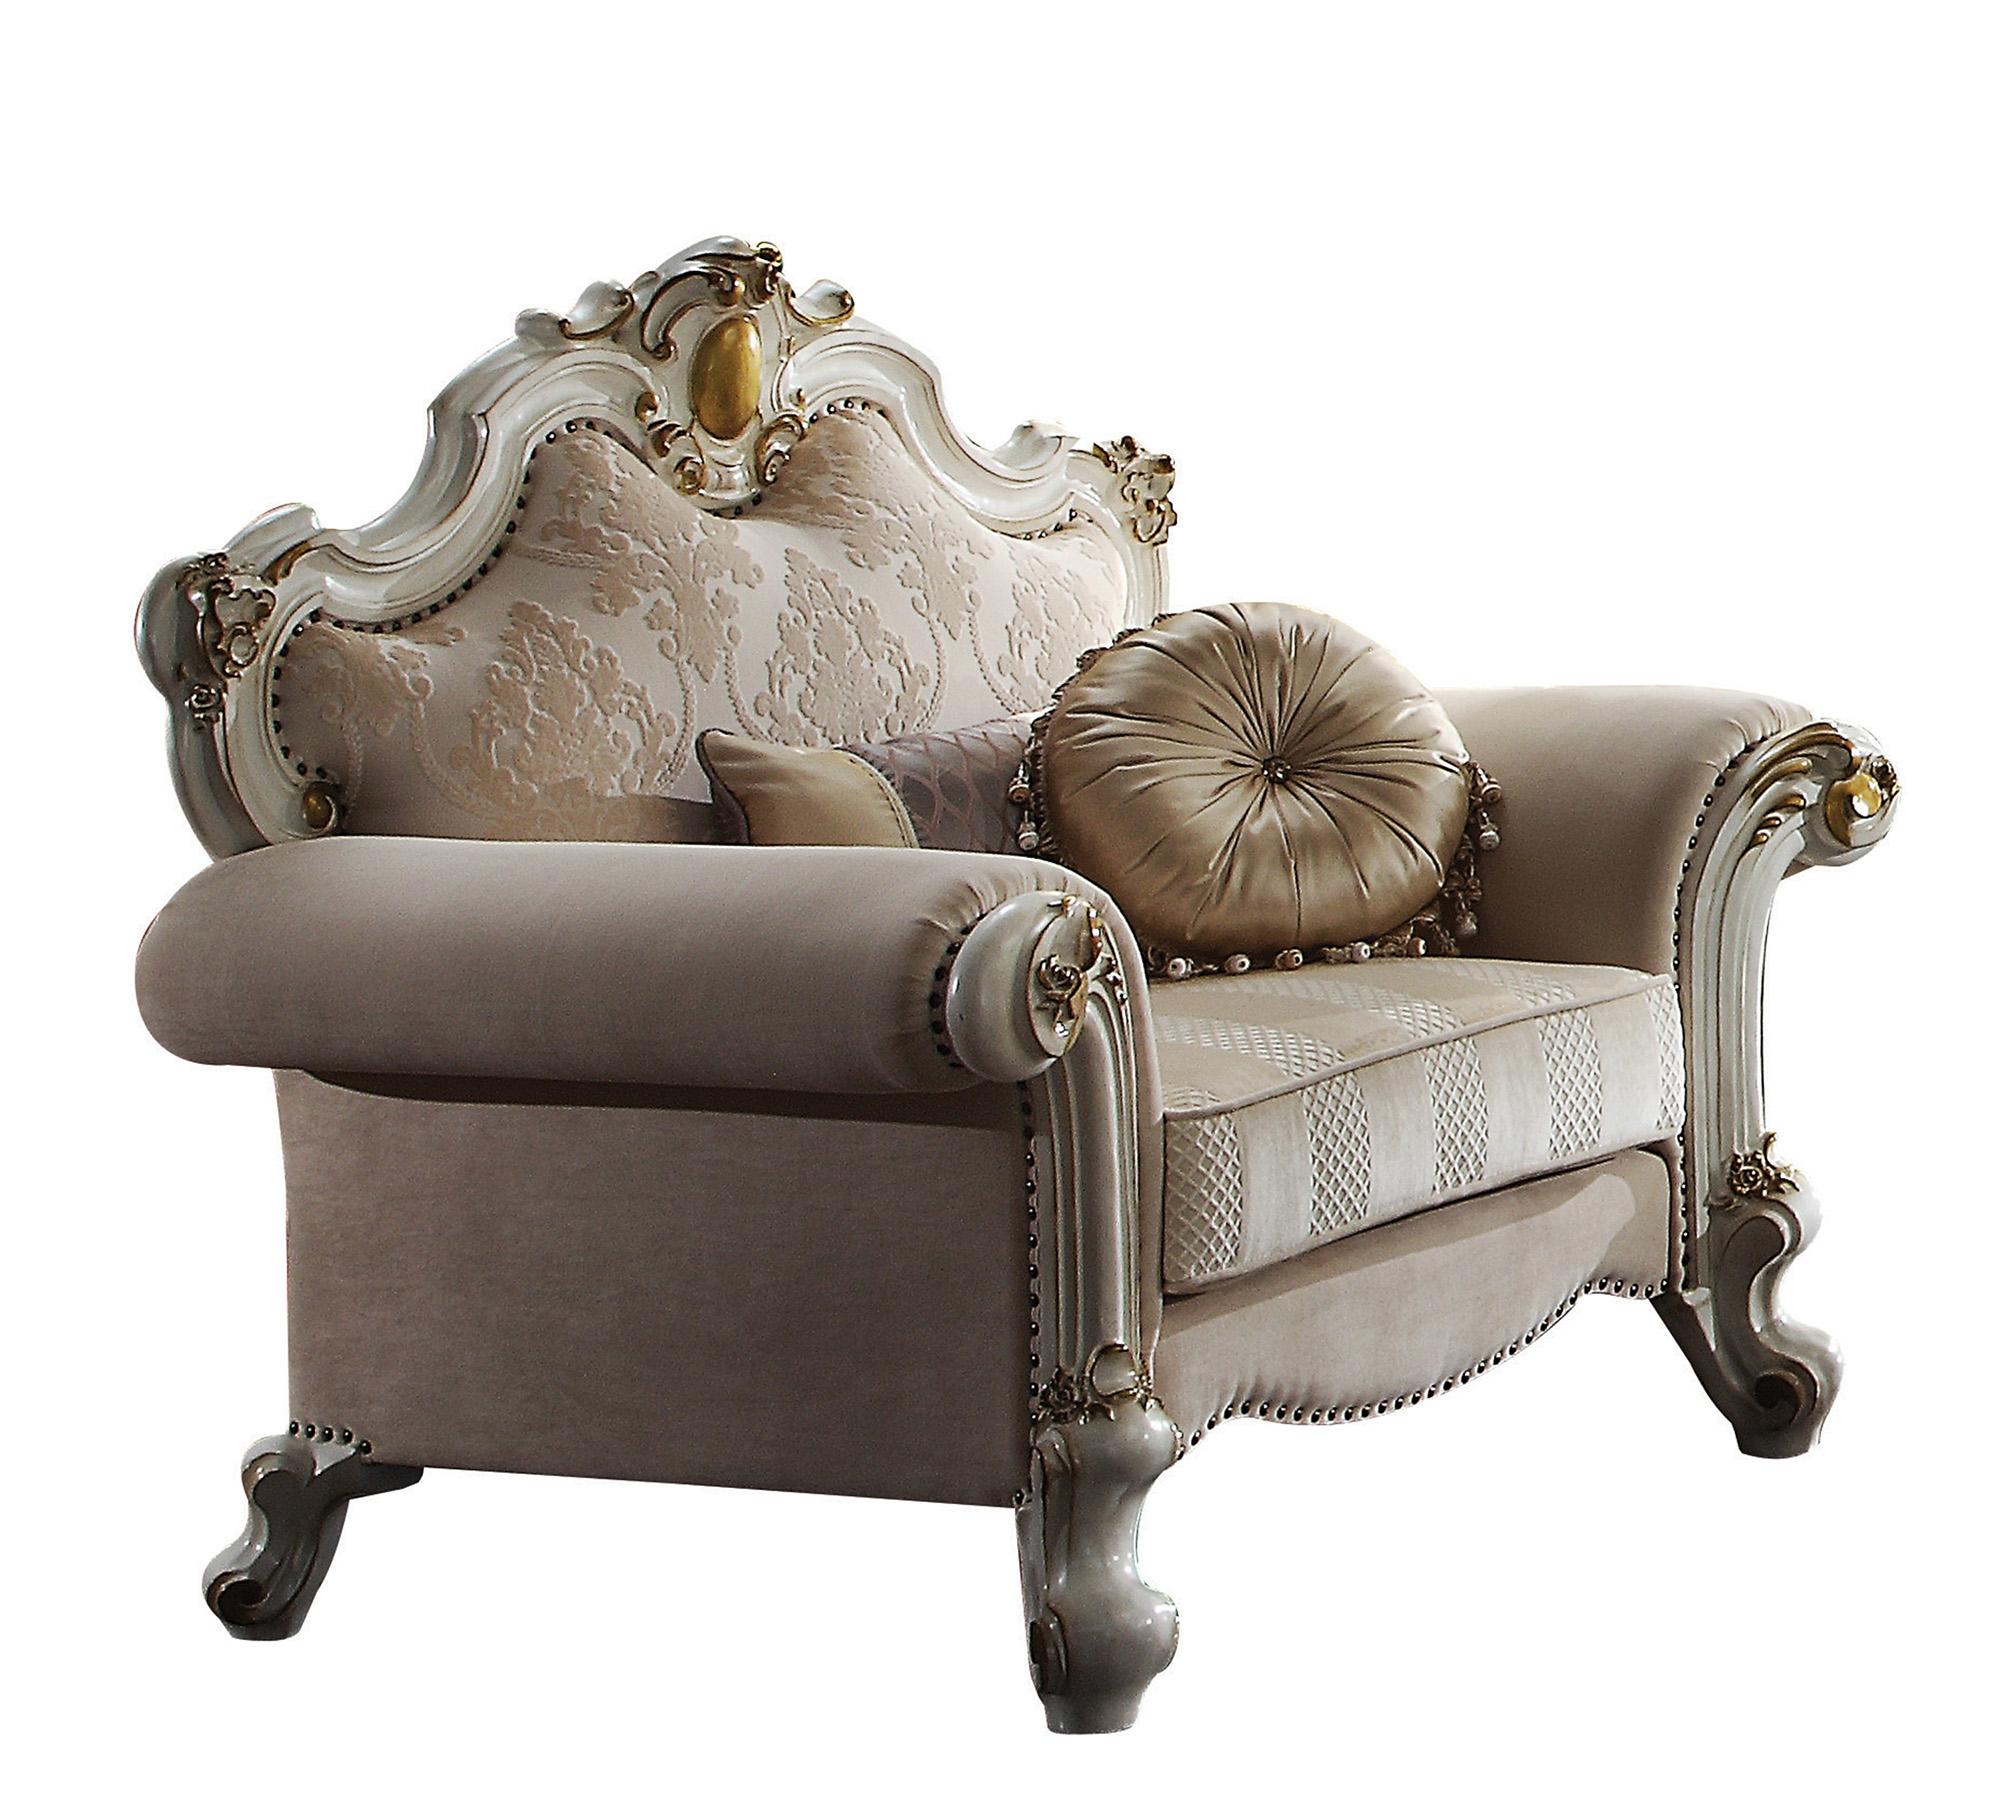 Classic, Traditional Arm Chair Picardy II 55462 55462-Picardy II in Pearl, Antique, Gold Fabric